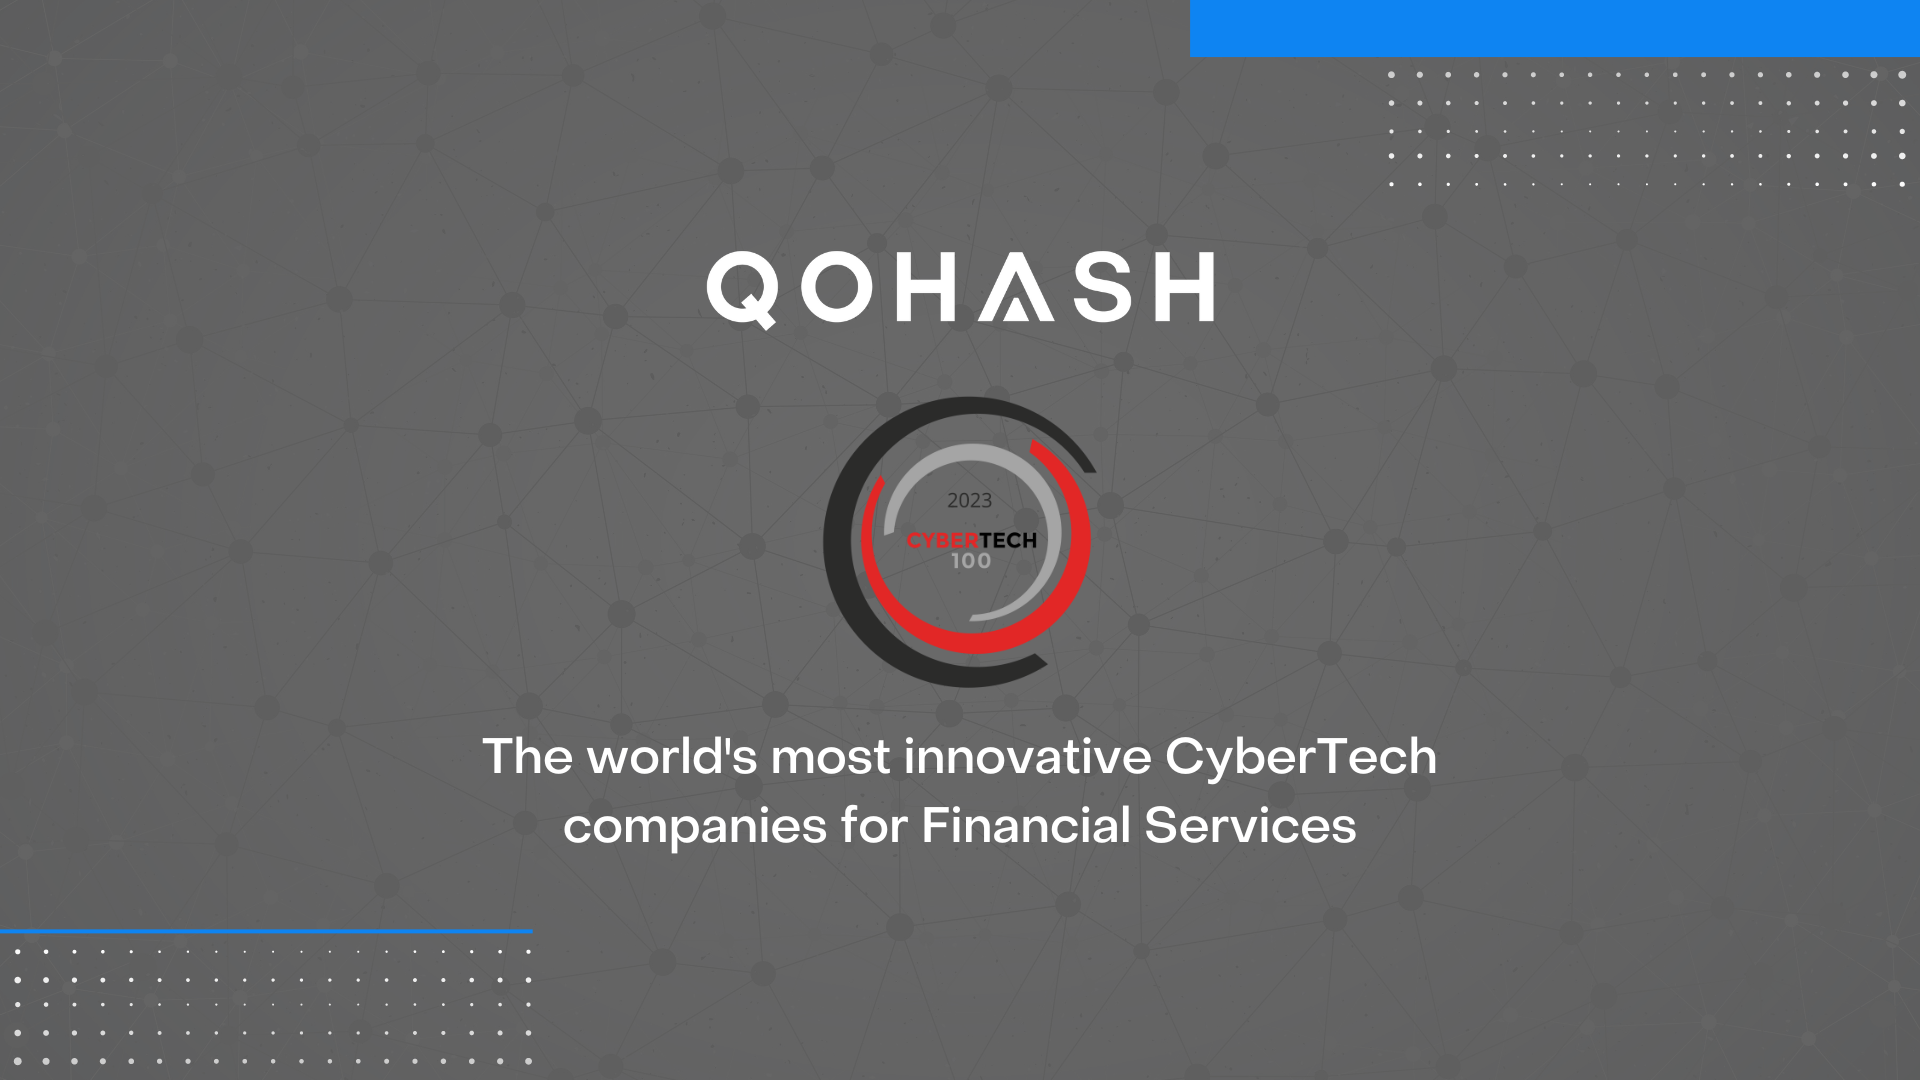 The world's most innovative CyberTech companies for Financial Services